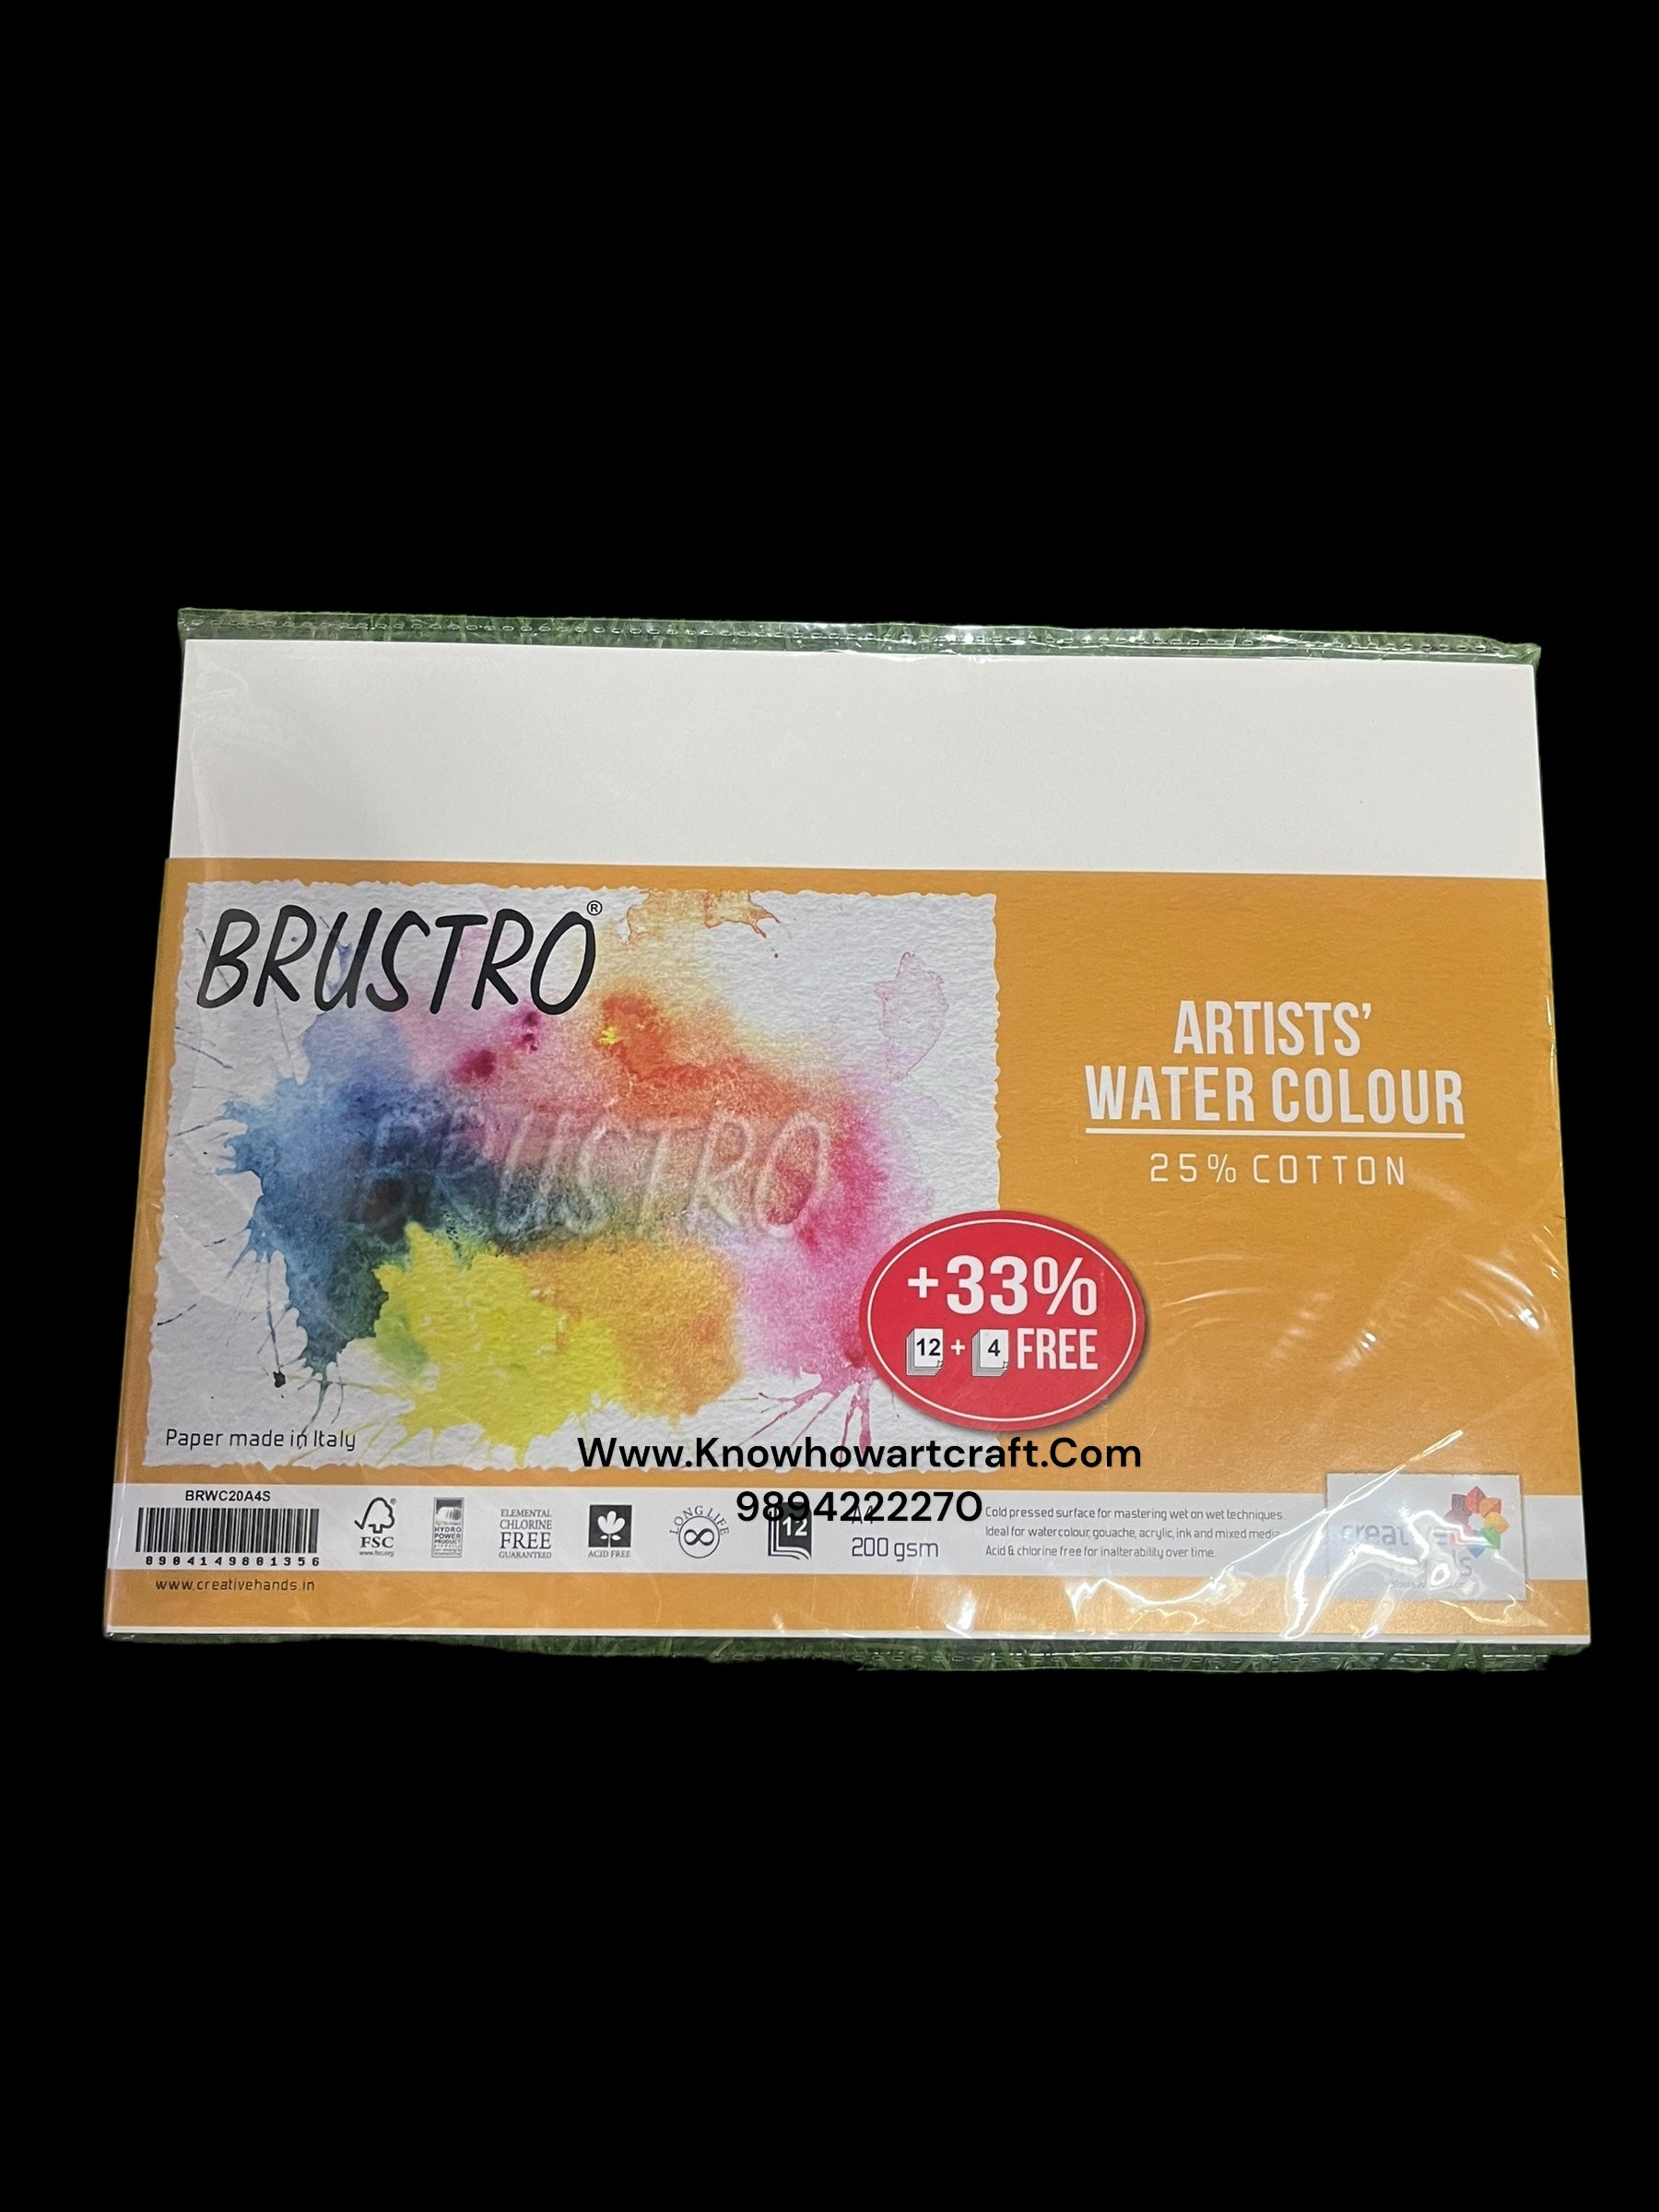 Brustro Artists water colour A4 size 200 gsm